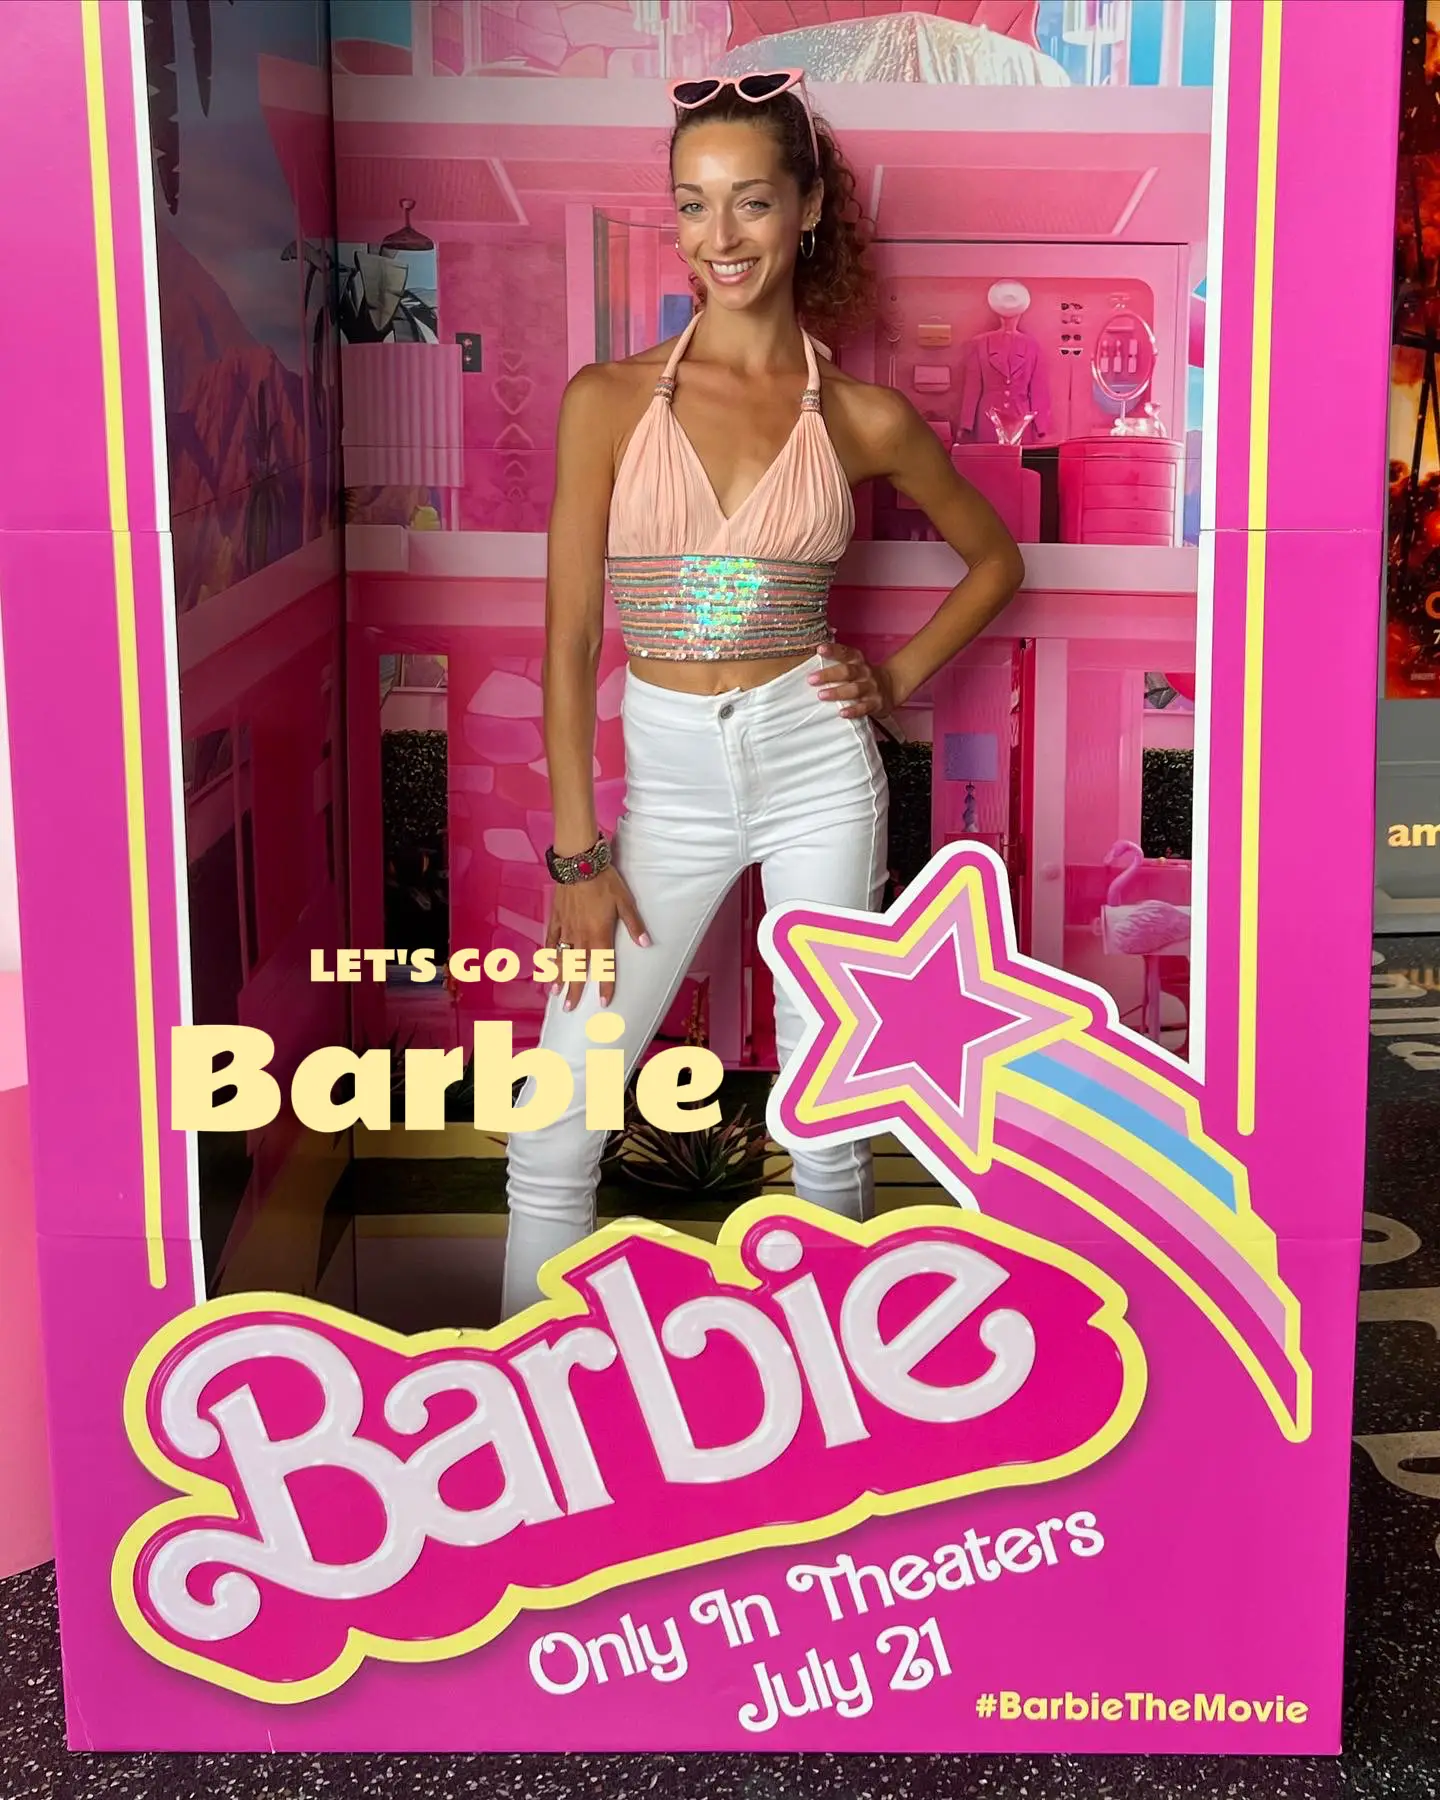 Forever 21 - Come on Barbie, where's the party? 💁🏻‍♀️ Score it